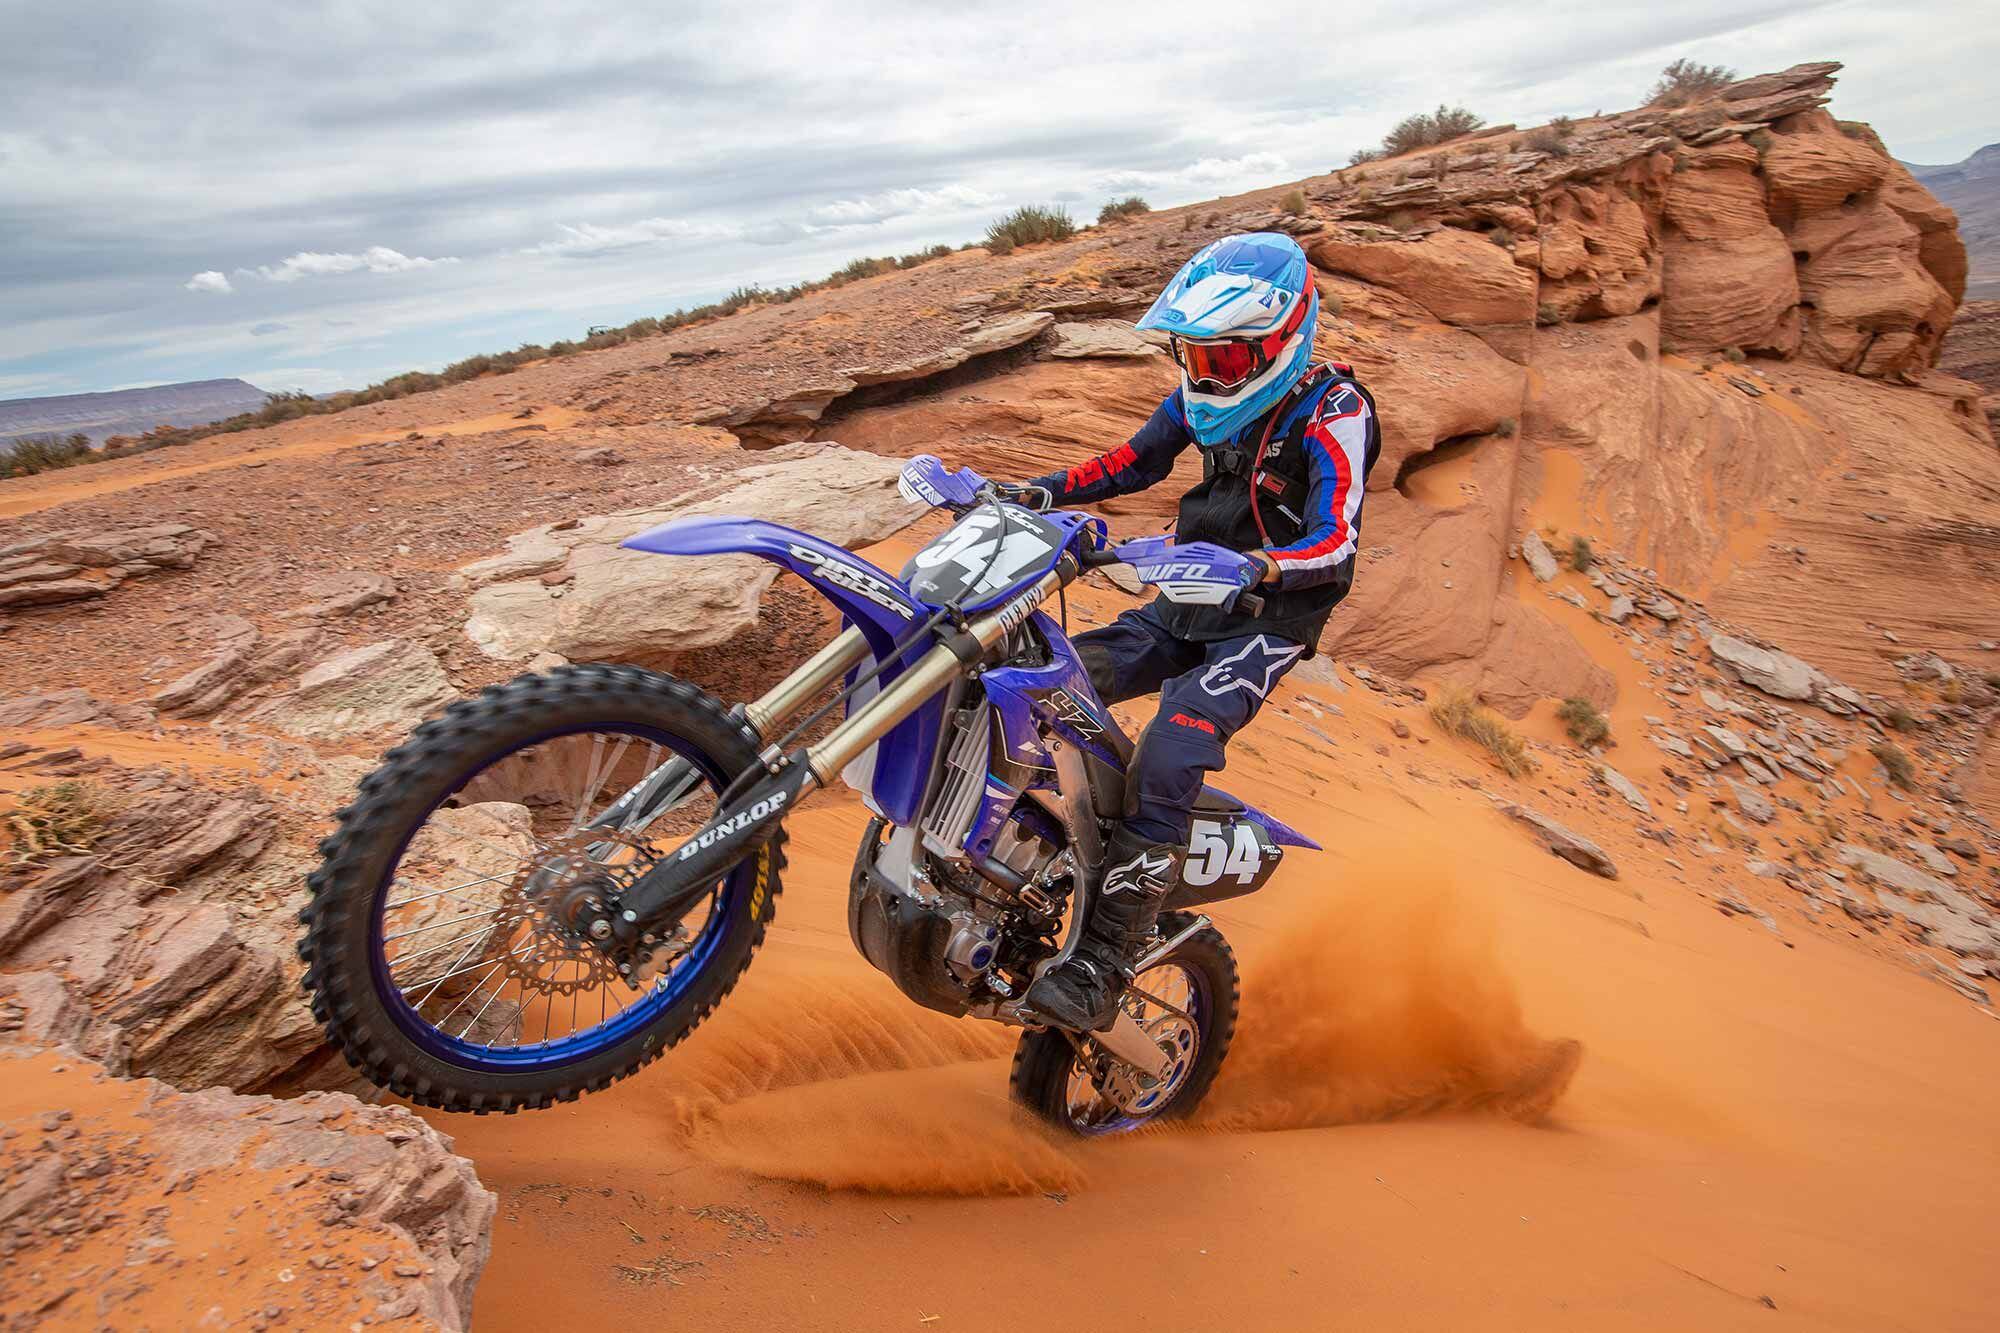 One of the YZ250FX’s only weaknesses is that it doesn’t pull as far in the rpm range as the EX 350F and FX 450.